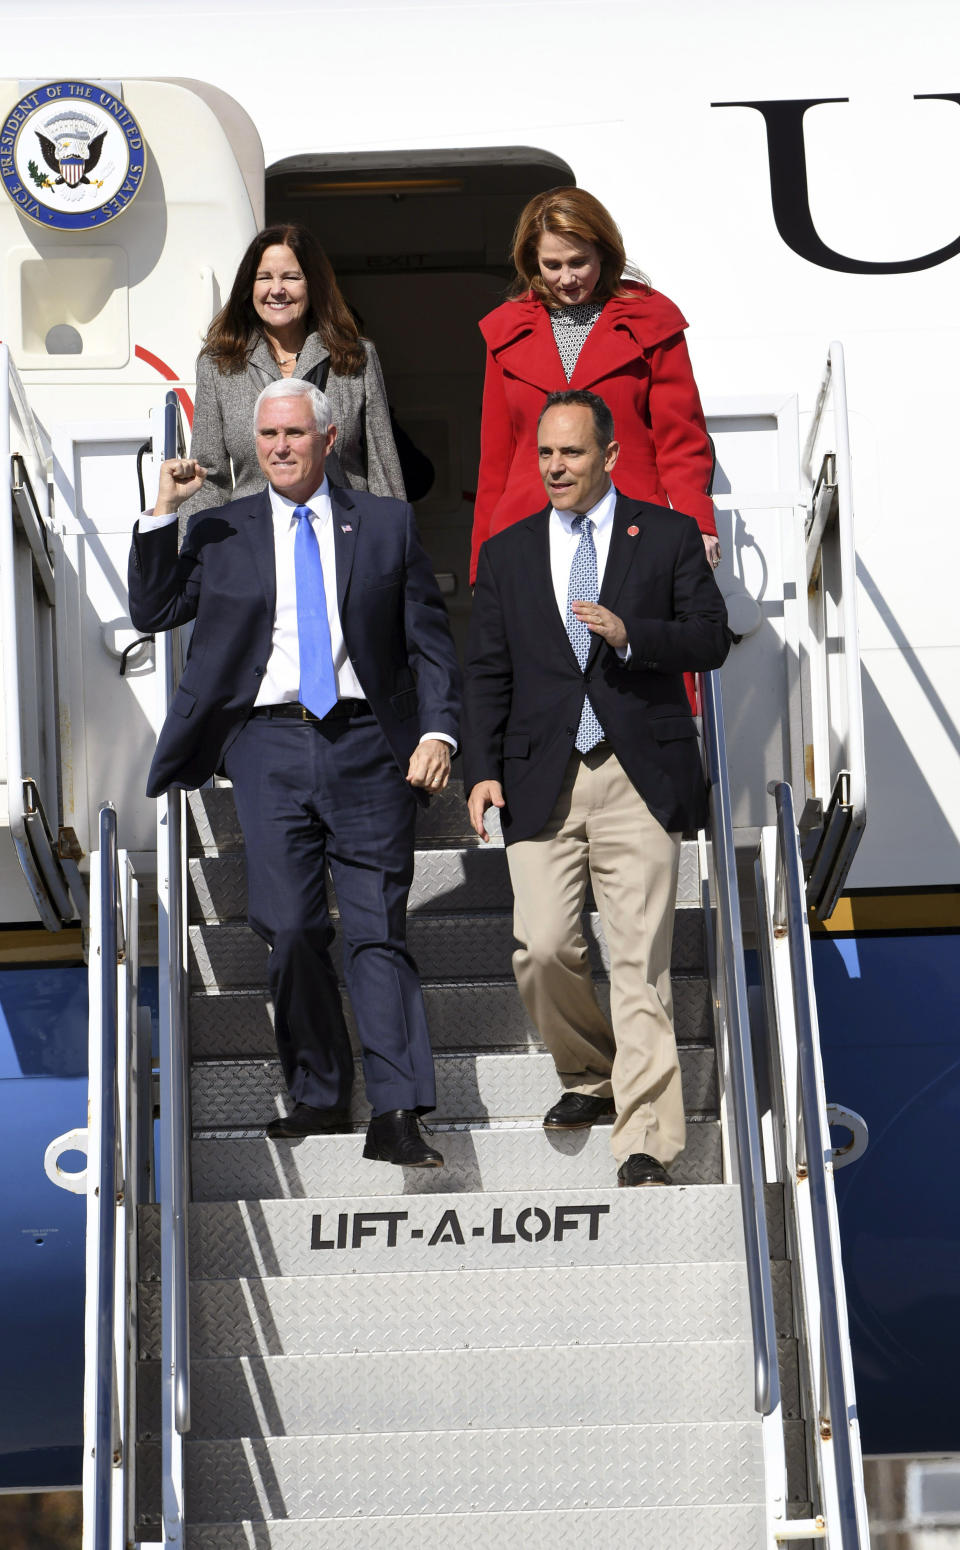 Vice President Mike Pence and Kentucky Gov. Matt Bevin arrive at London-Corbin Airport, Friday, Nov. 1, 2019 in London, Ky. Attempting to turn the Kentucky governor's race into a referendum on impeachment, Vice President Mike Pence urged voters Friday to register their disgust with the "endless investigations" of President Donald Trump by reelecting his close ally, Republican Gov. Matt Bevin.(John Flavell/Lexington Herald-Leader via AP)